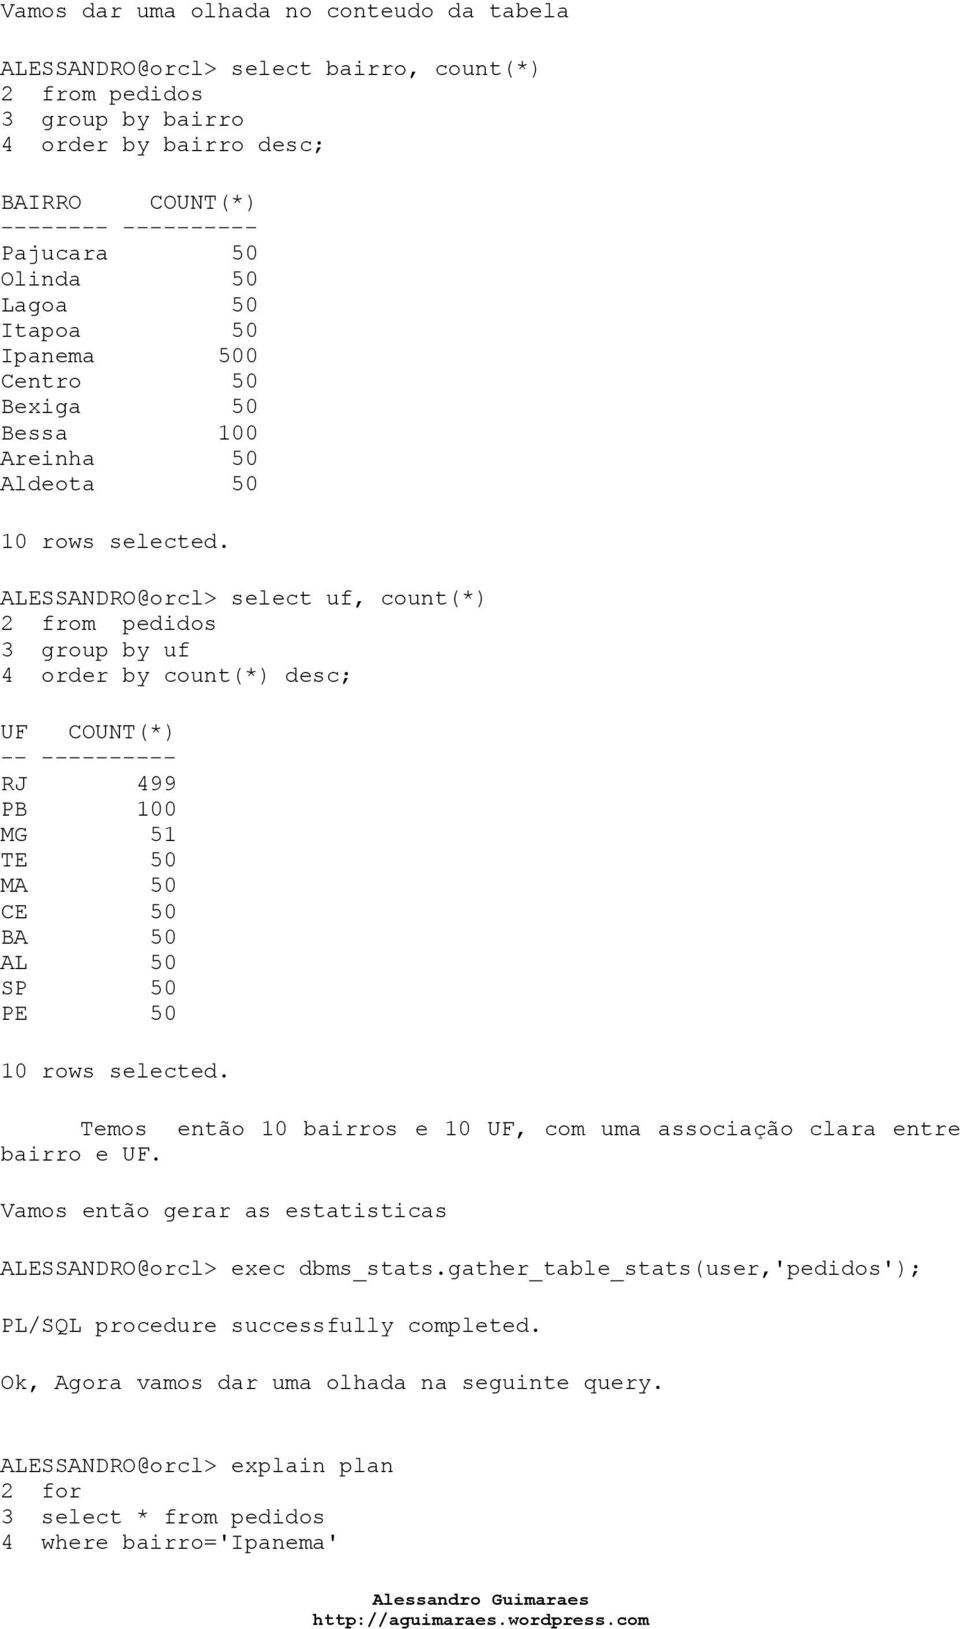 ALESSANDRO@orcl> select uf, count(*) 2 from pedidos 3 group by uf 4 order by count(*) desc; UF COUNT(*) -- --- RJ 499 PB 100 MG 51 TE 50 MA 50 CE 50 BA 50 AL 50 SP 50 PE 50 10 rows